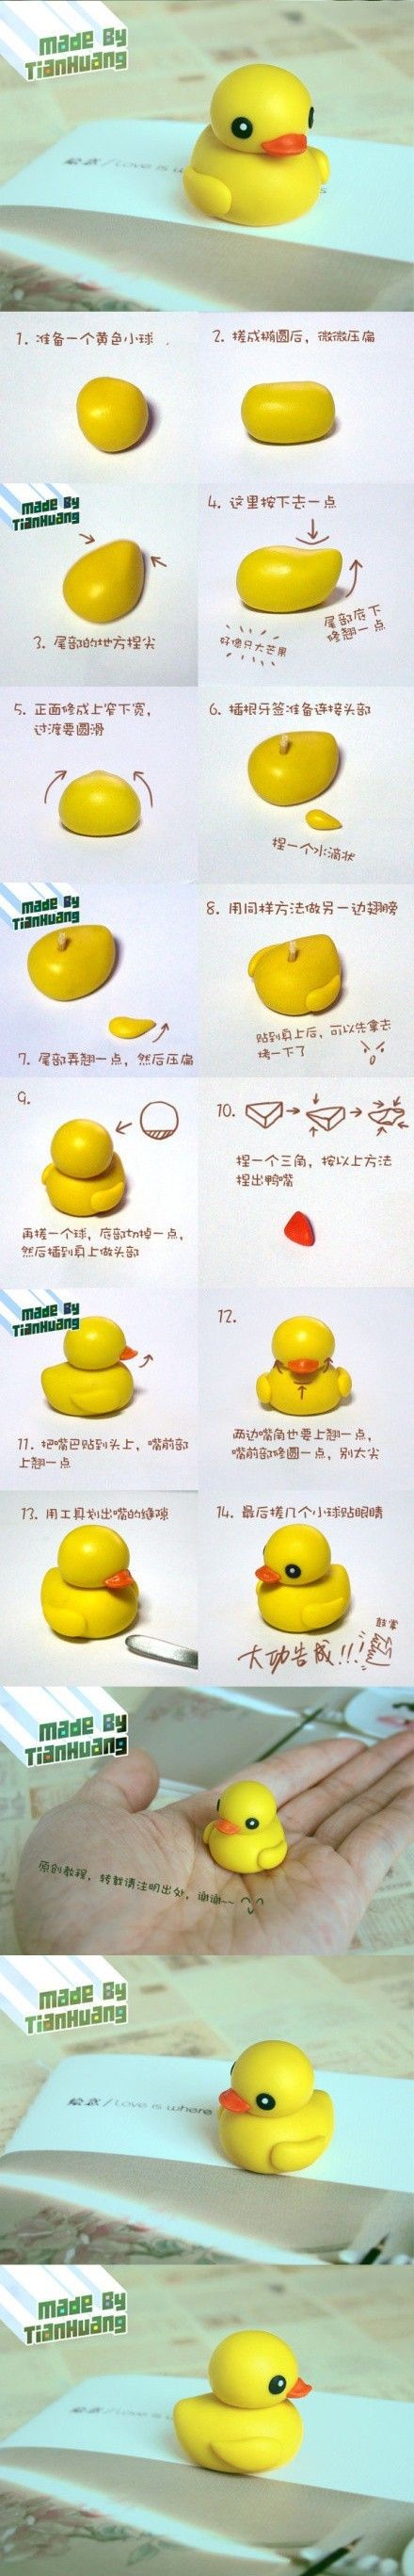 How to make a fondant rubber ducky